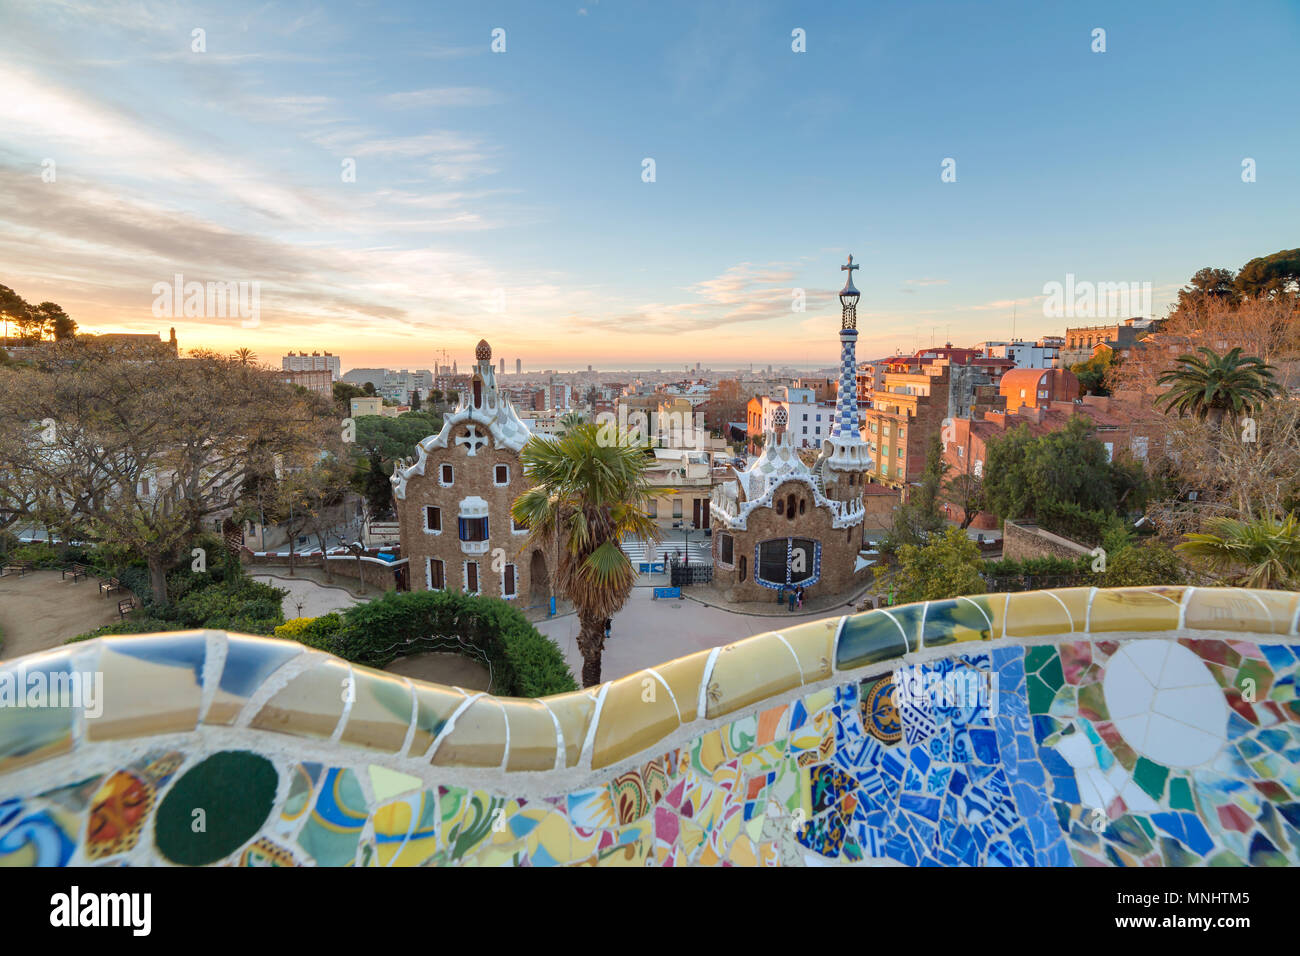 Sunrise view of the Park Guell designed by Antoni Gaudi, Barcelona, Spain. Stock Photo